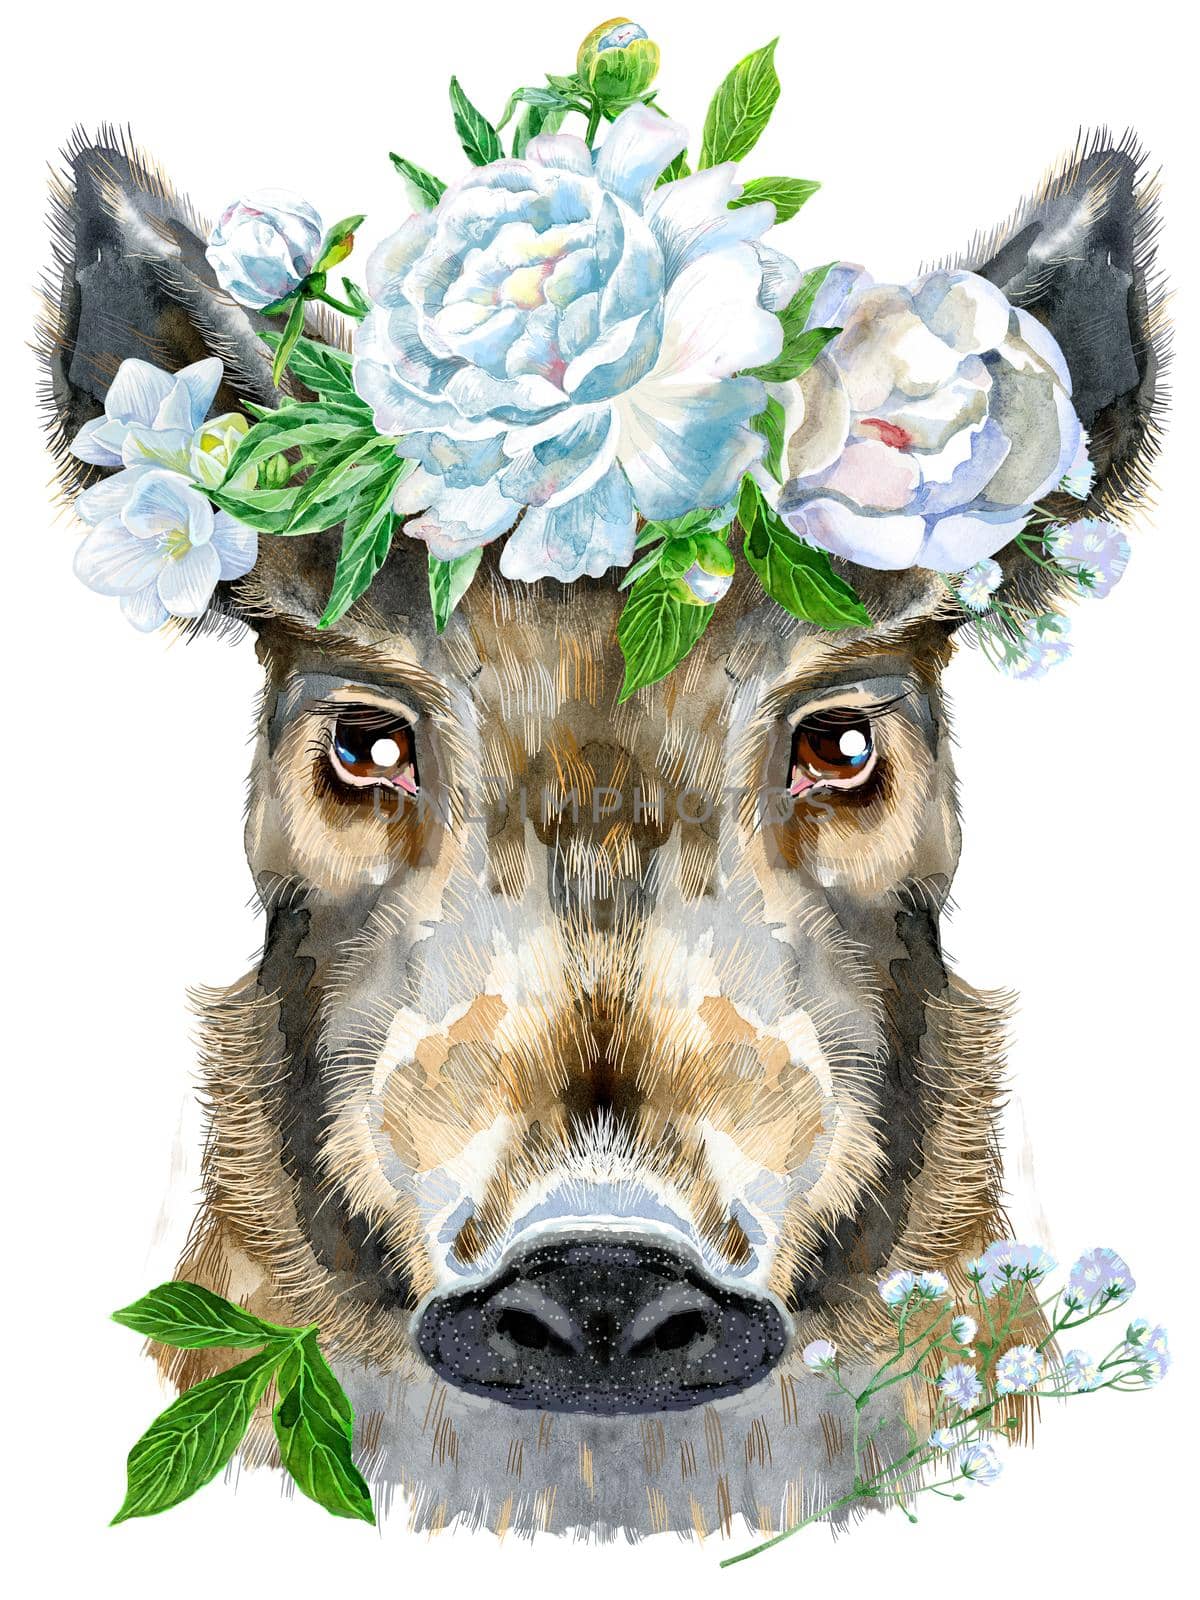 Cute piggy. Wild boar in a wreath of white peonies and freesias for T-shirt graphics. Watercolor brown boar illustration